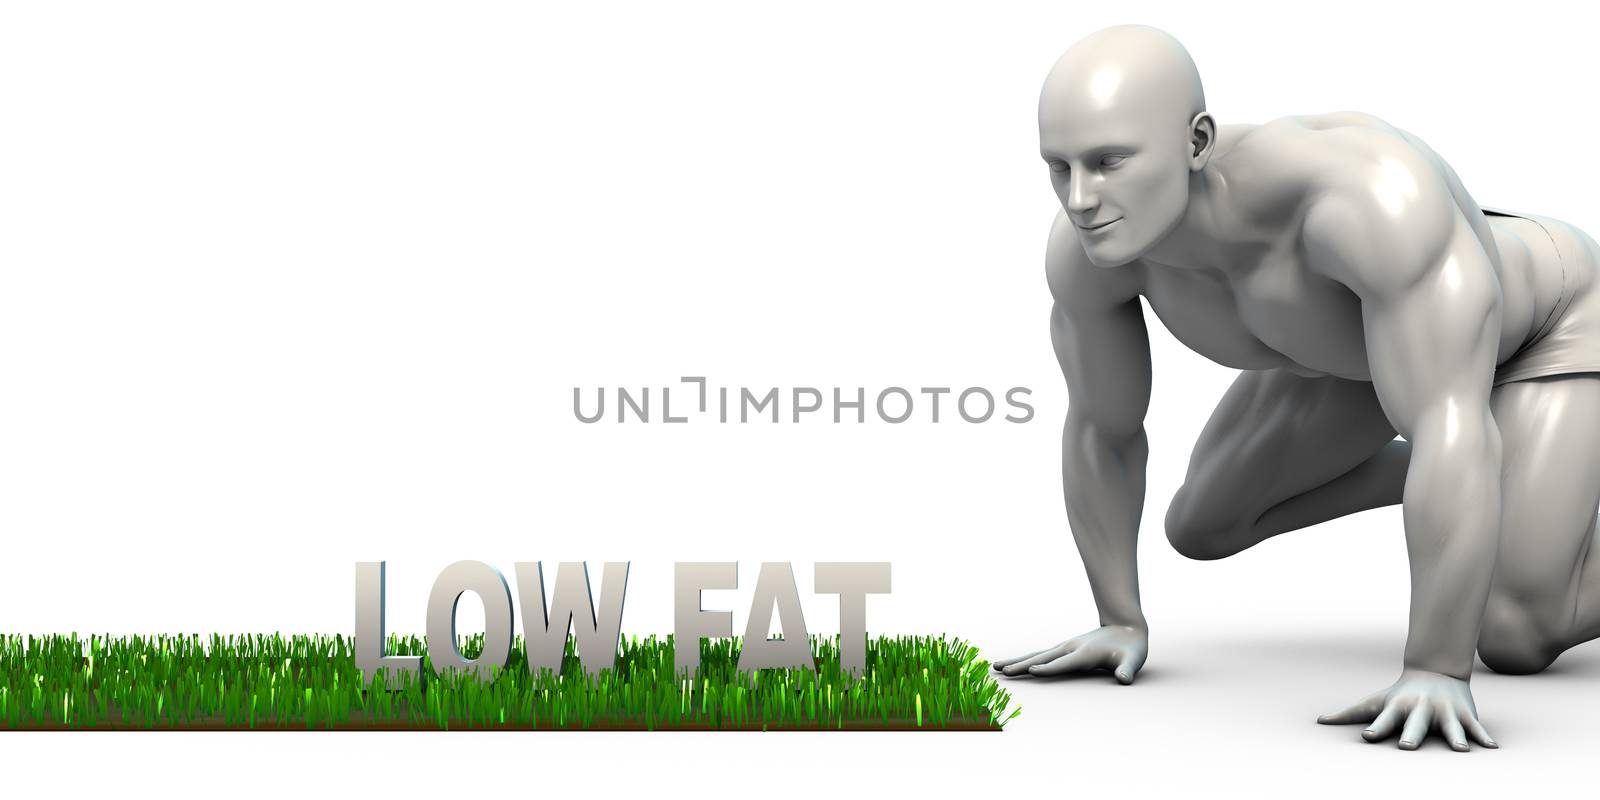 Low Fat Concept with Man Looking Closely to Verify